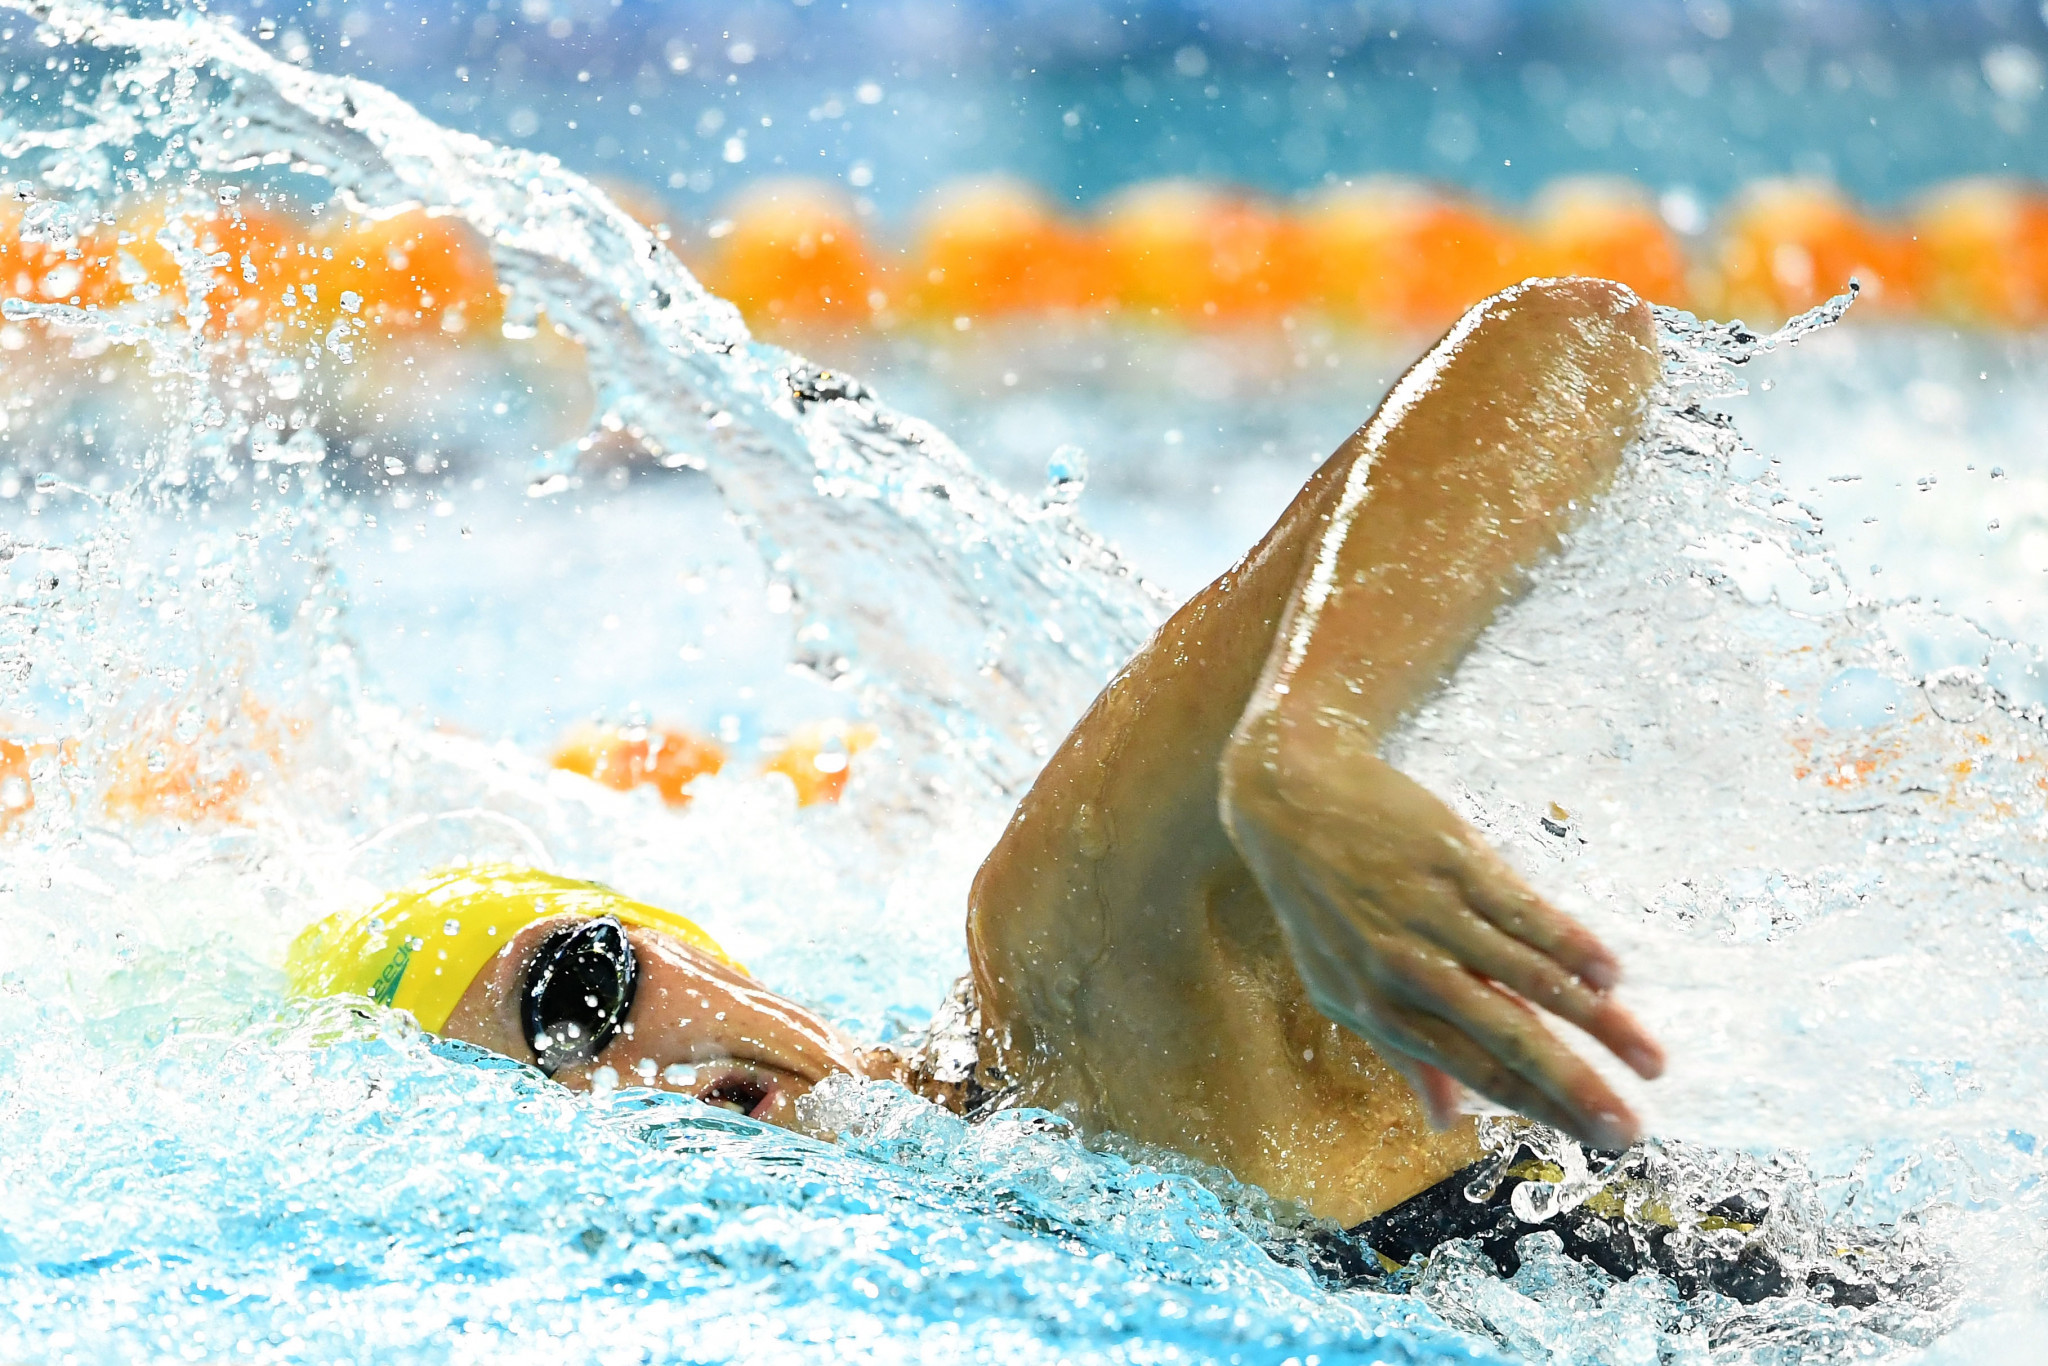 Australia's Ellie Cole won the women's 100m backstroke at the World Para Swimming World Series in Melbourne ©Getty Images